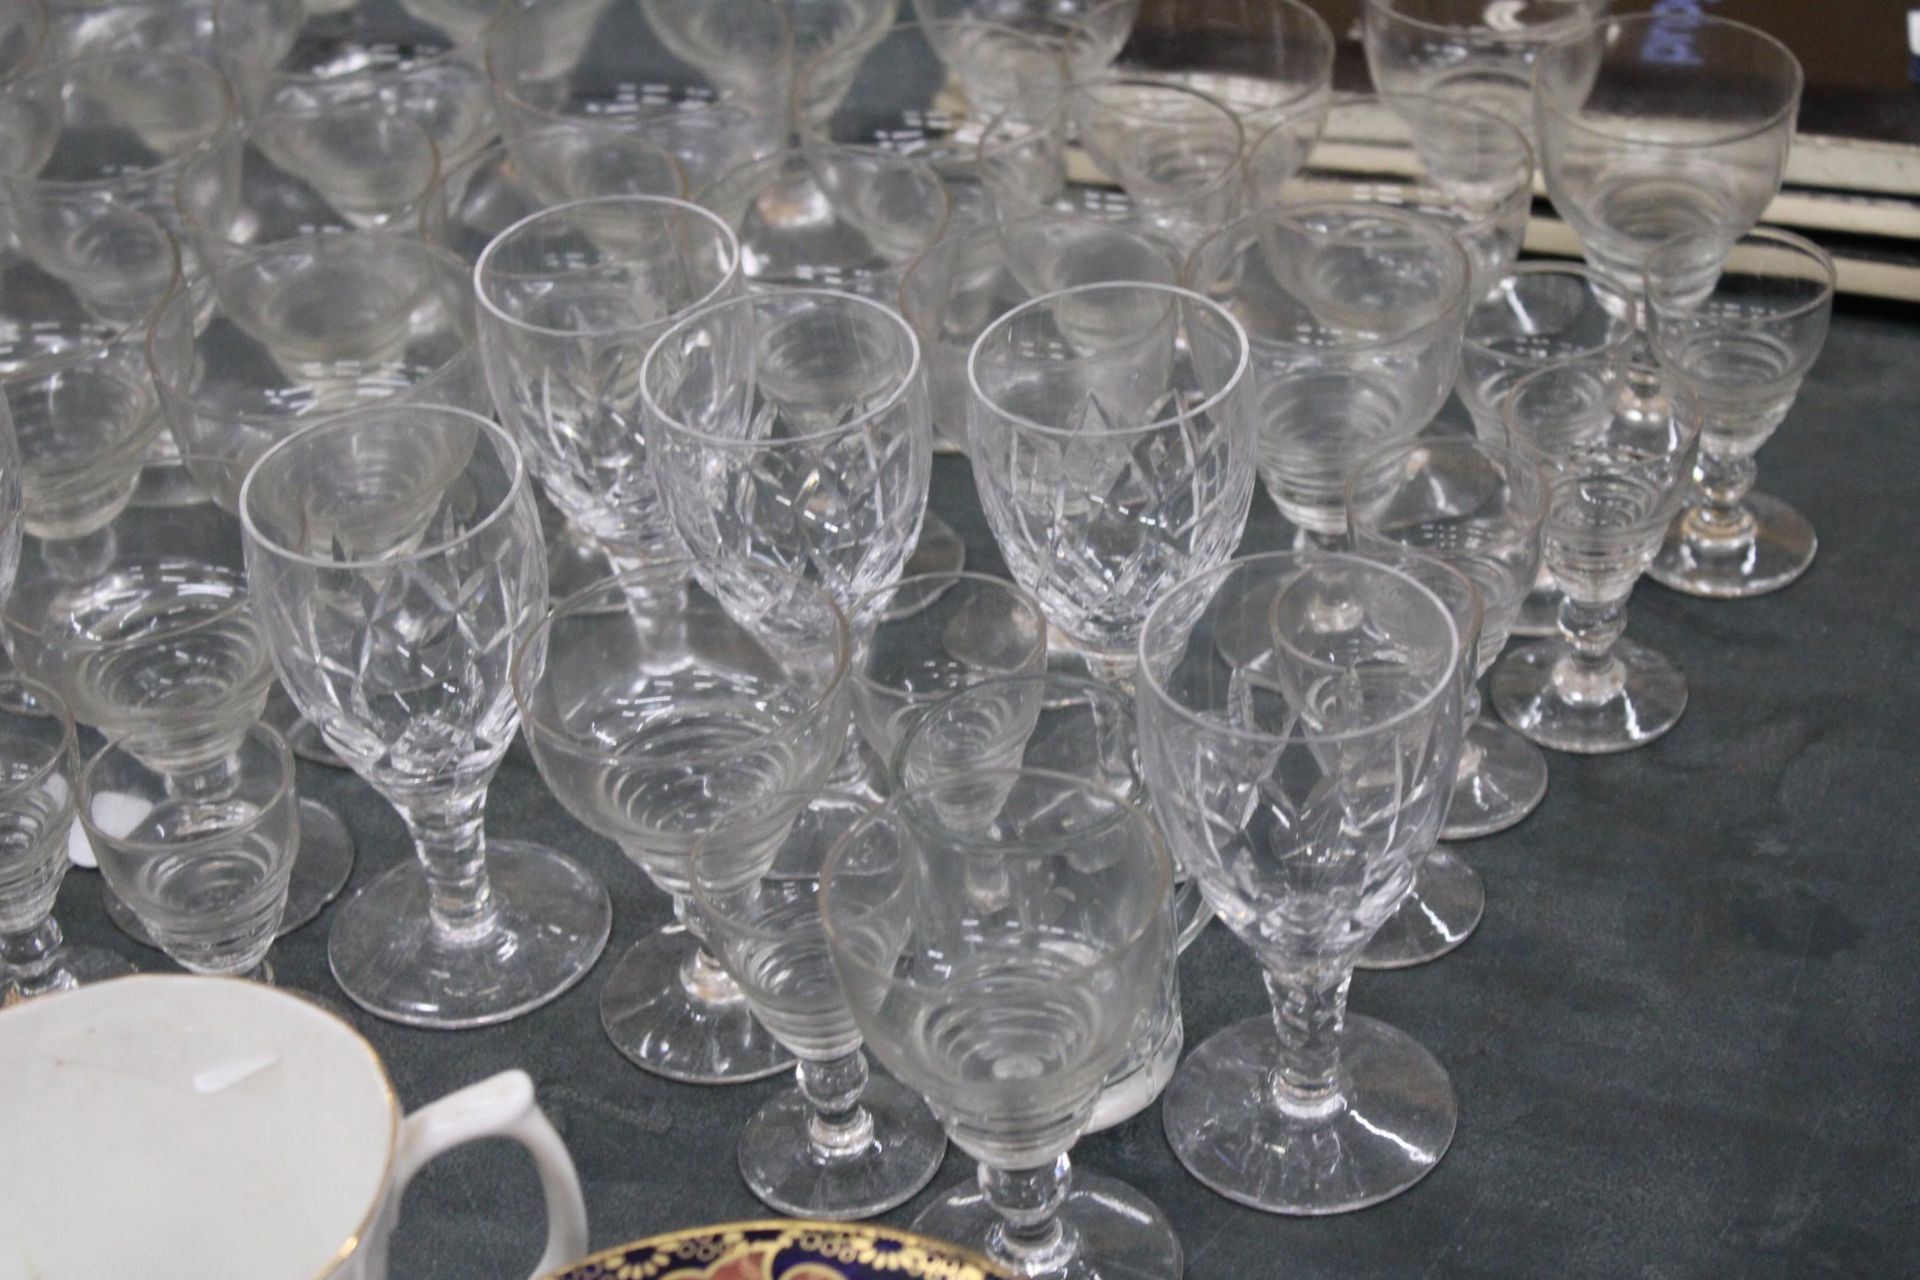 A LARGE QUANTITY OF GLASSES TO INCLUDE SHERRY, LIQUER, TUMBLERS, ETC - Image 3 of 5